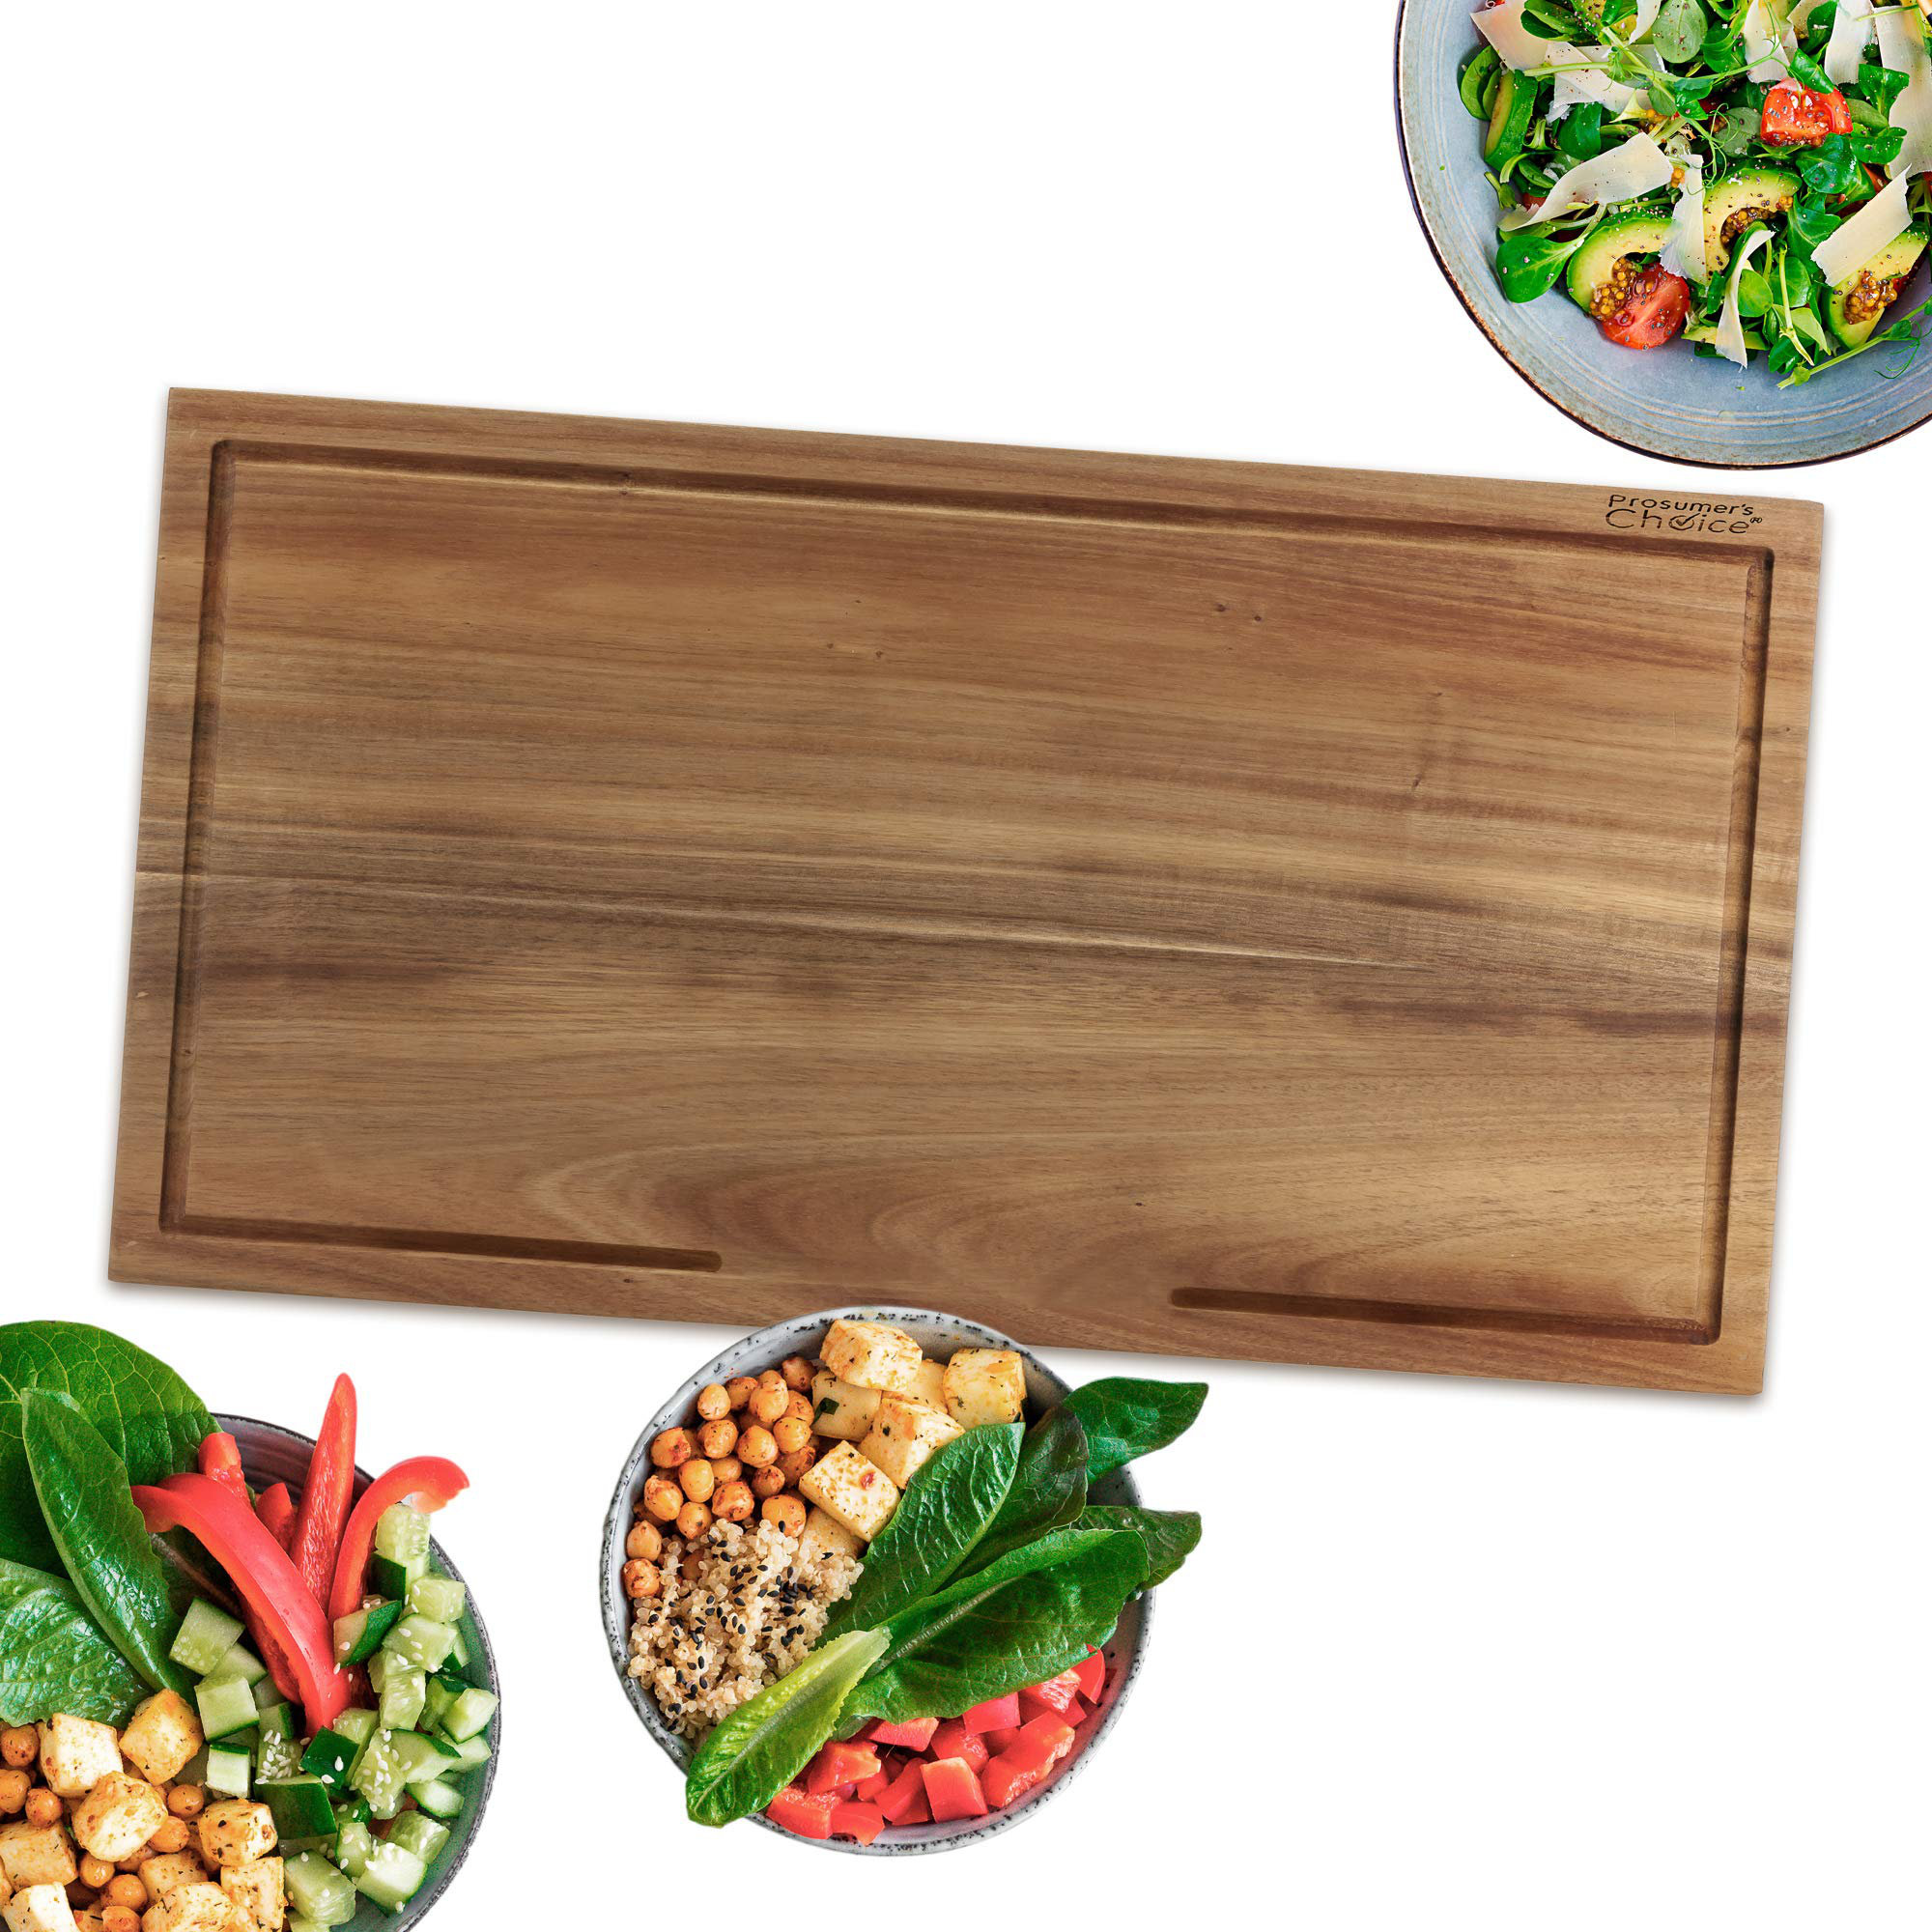 Prosumer's Choice Bamboo Stovetop Cover Cutting Board with Adjustable Legs  - Large Size